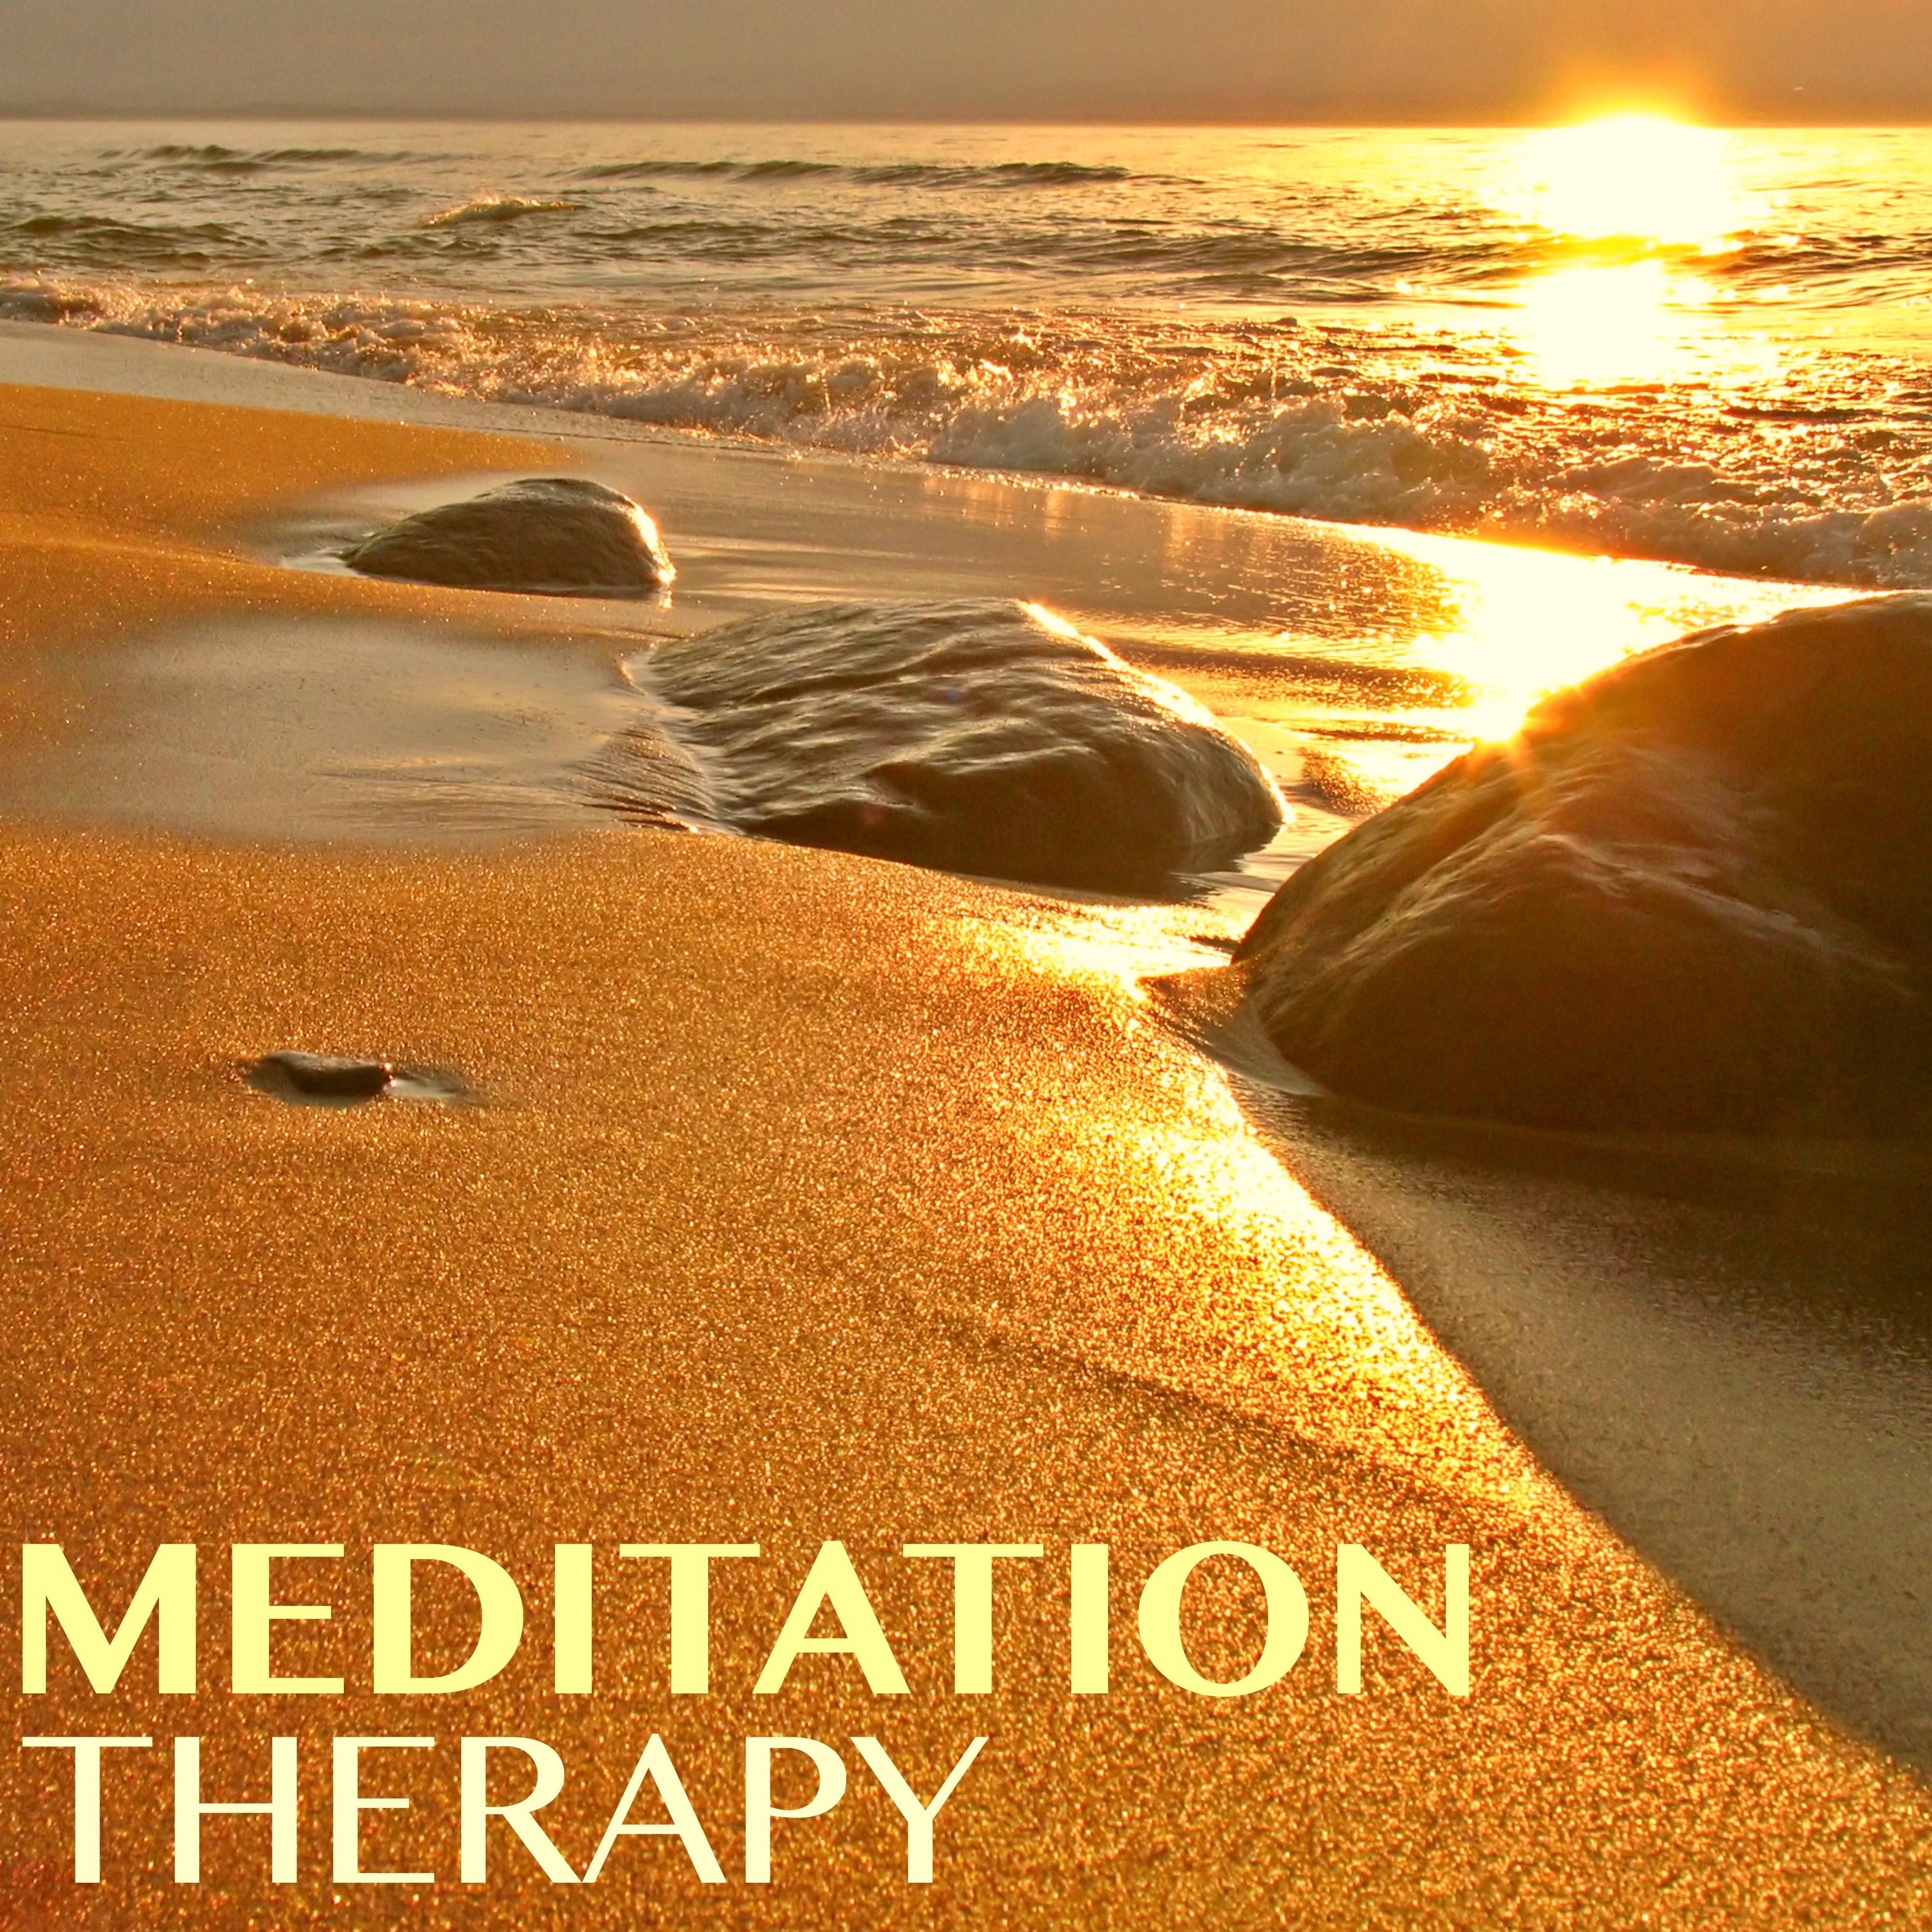 Meditation Therapy - Healing Sounds for Stress Relief & Inner Peace